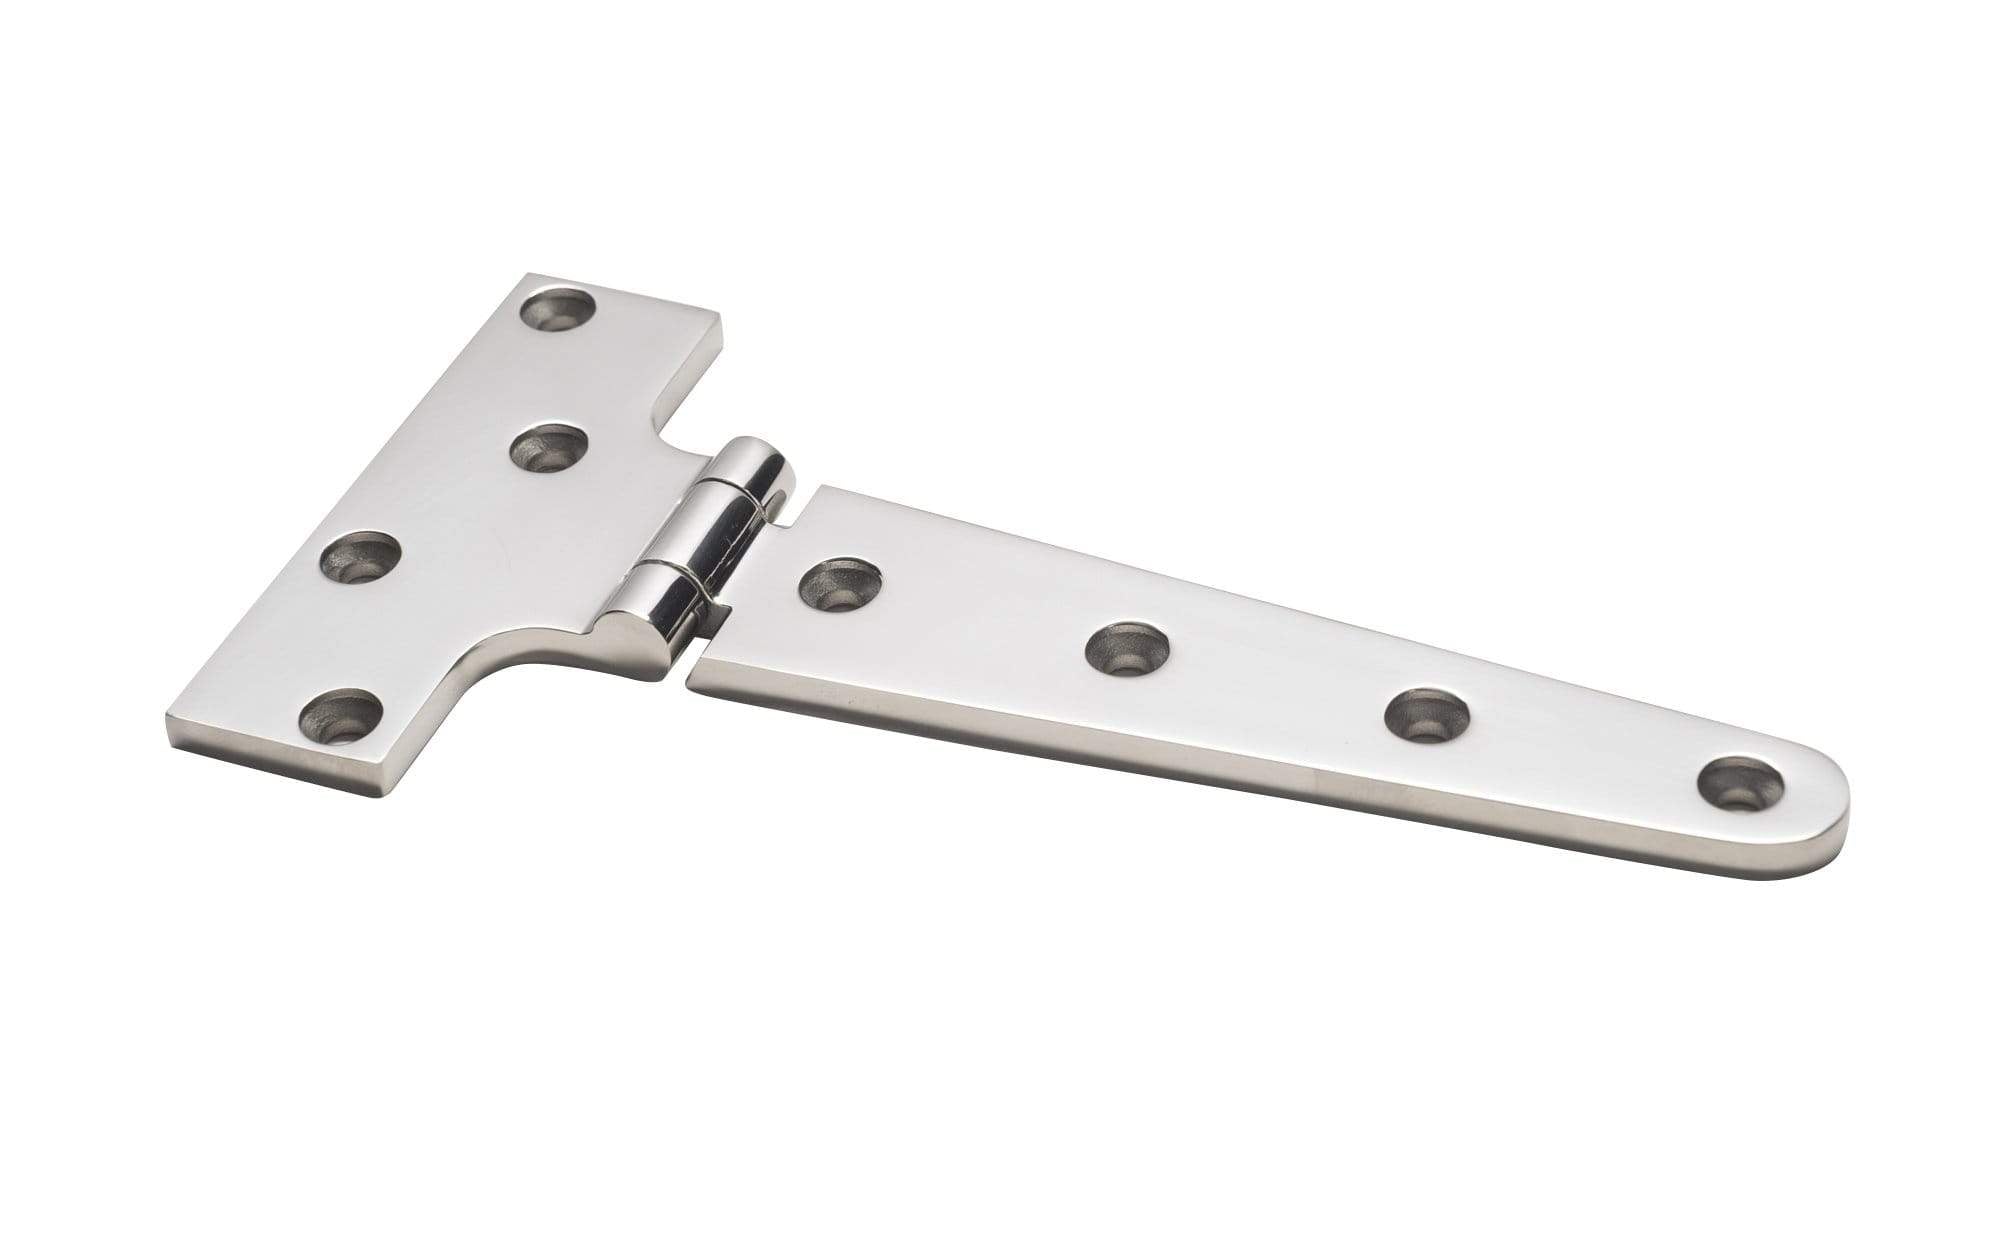 Stainless Steel Marine Heavy Duty Strap T-Hinges - 7 Inch - Sold Individually